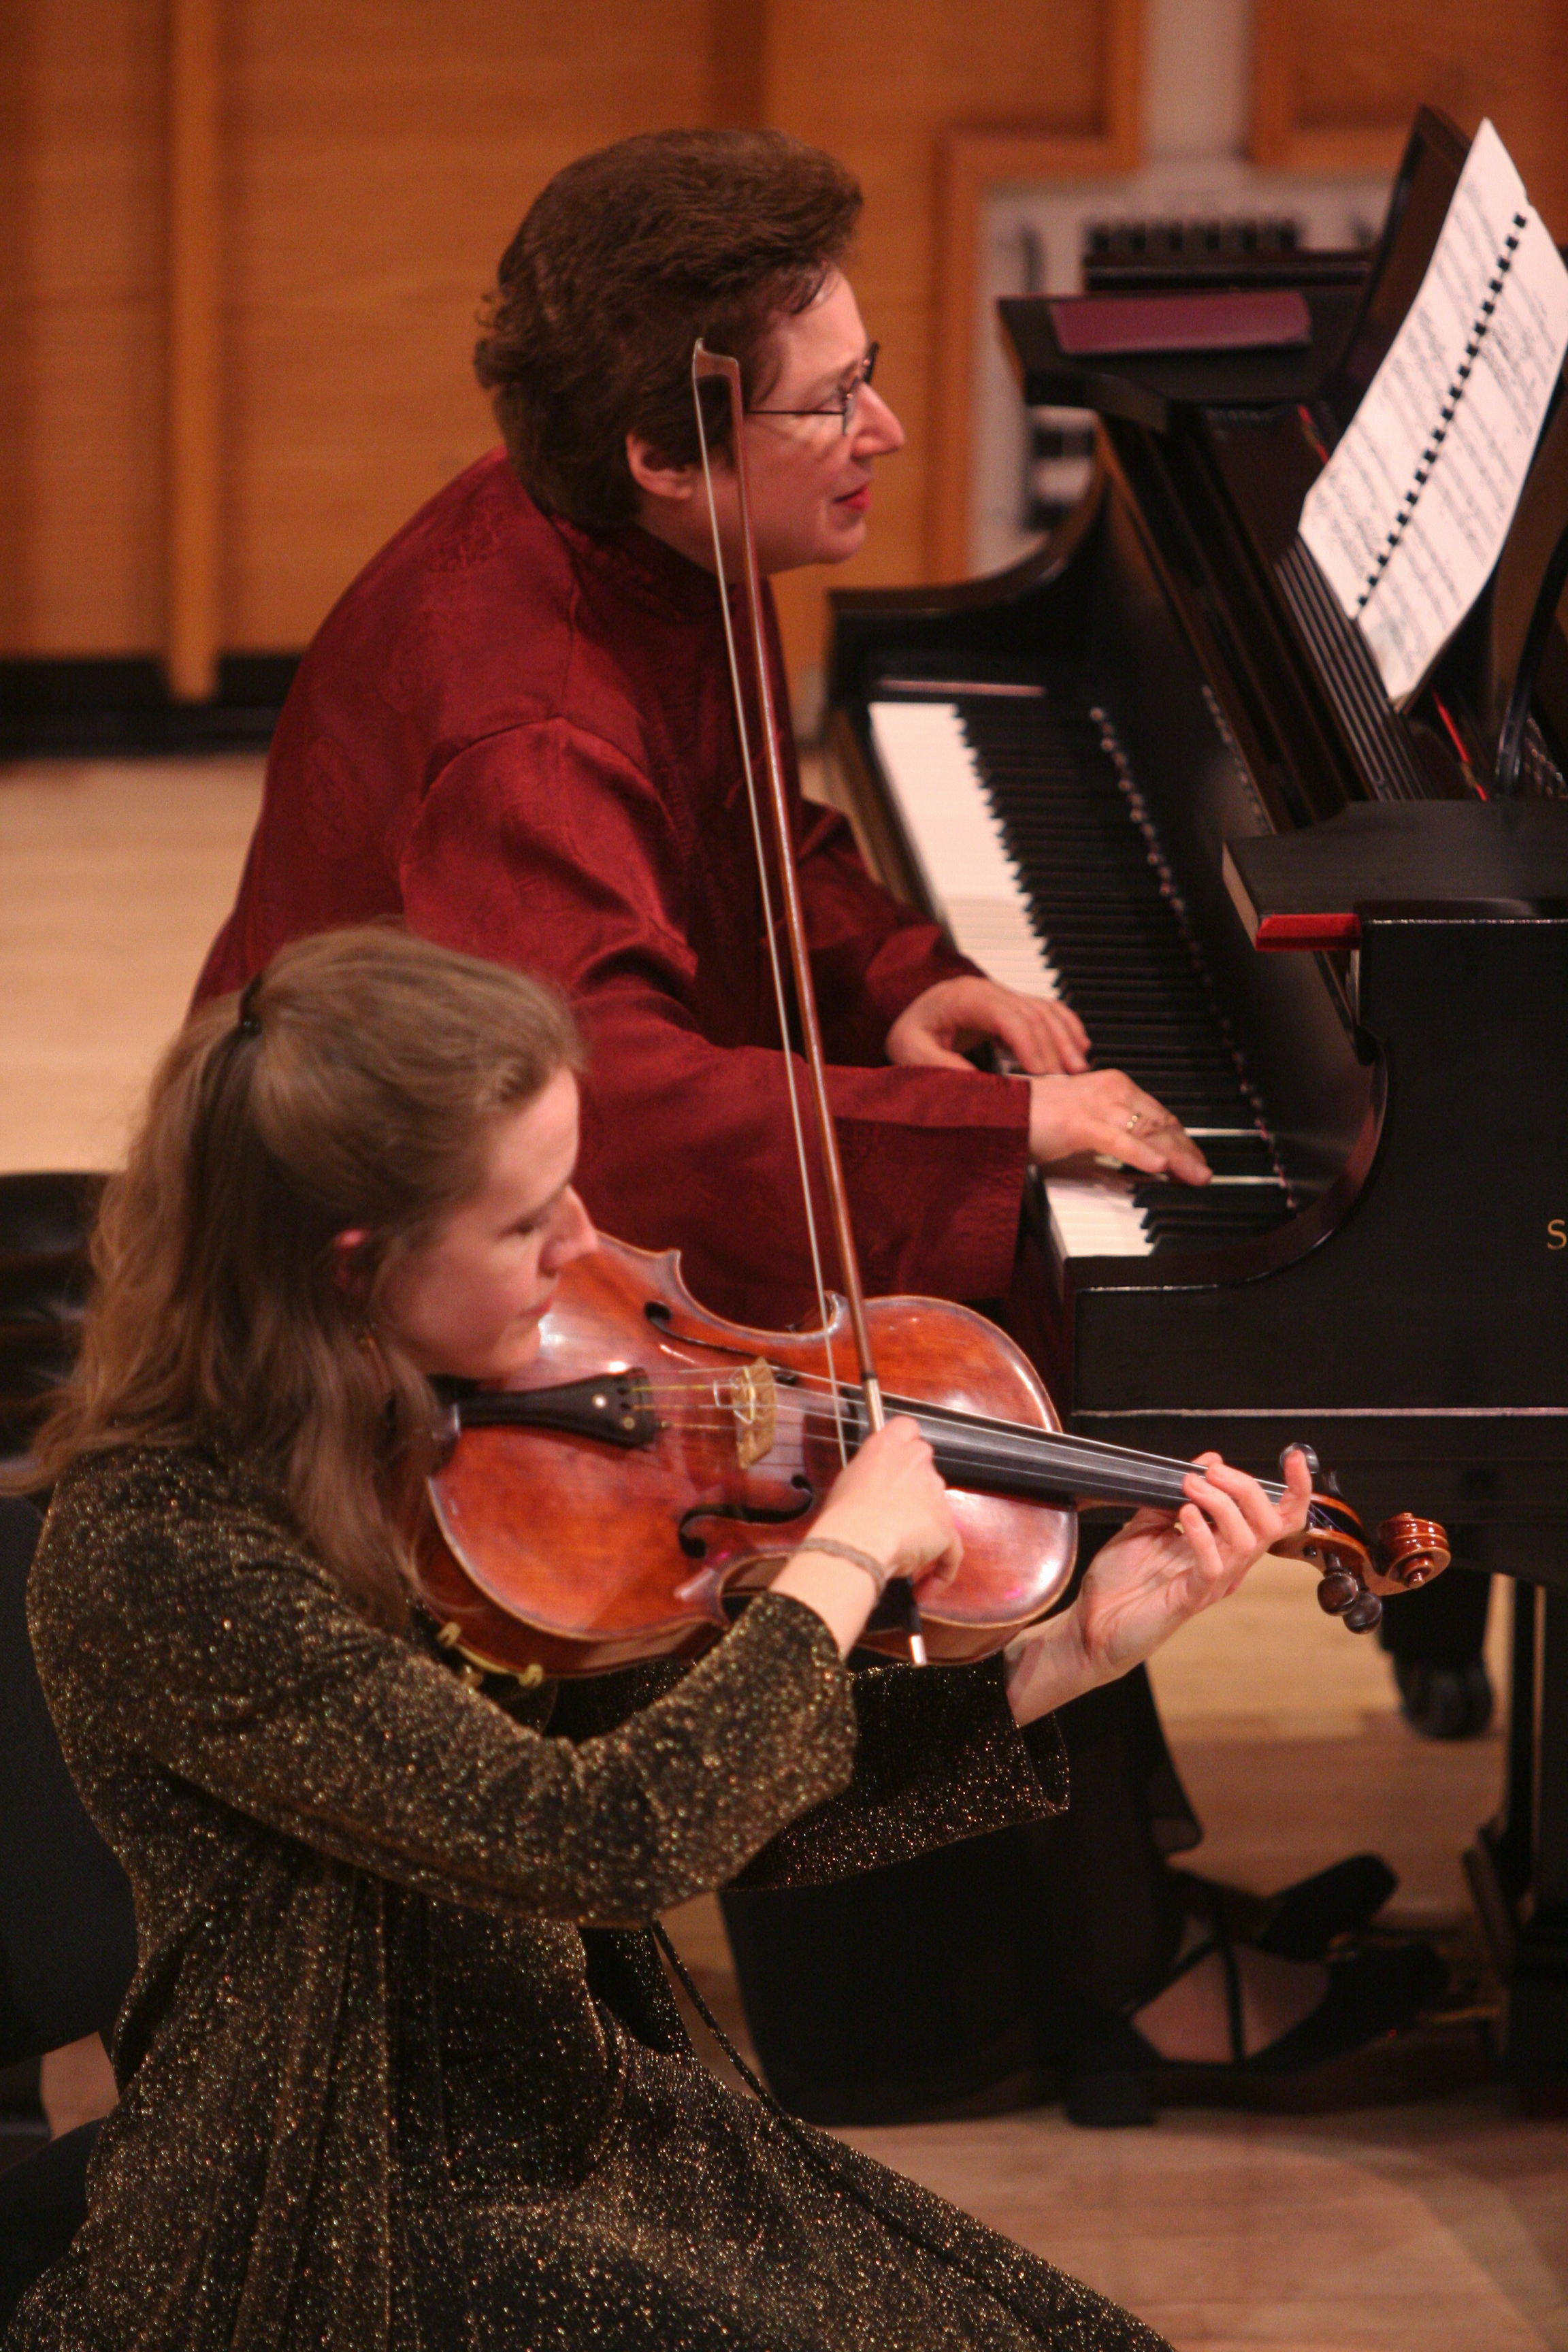 The South Berkshire Concert Series will present the adventurous violist Stephanie Griffin and the veteran new music pianist Cheryl Seltzer on Sunday, April 2, at 3:00 p.m. in Kellogg Music Center at Bard College at Simon's Rock. 

Griffin and Seltzer will perform an exciting and challenging program of works for viola and piano, including “Sonata para Viola y Piano (2015)” written especially for these performers by the distinguished Puerto Rican composer Roberto Sierra, the “Arpeggione” Sonata by Schubert, and works by Wolpe, Mamlok, Babbitt, and Ms Griffin herself. 